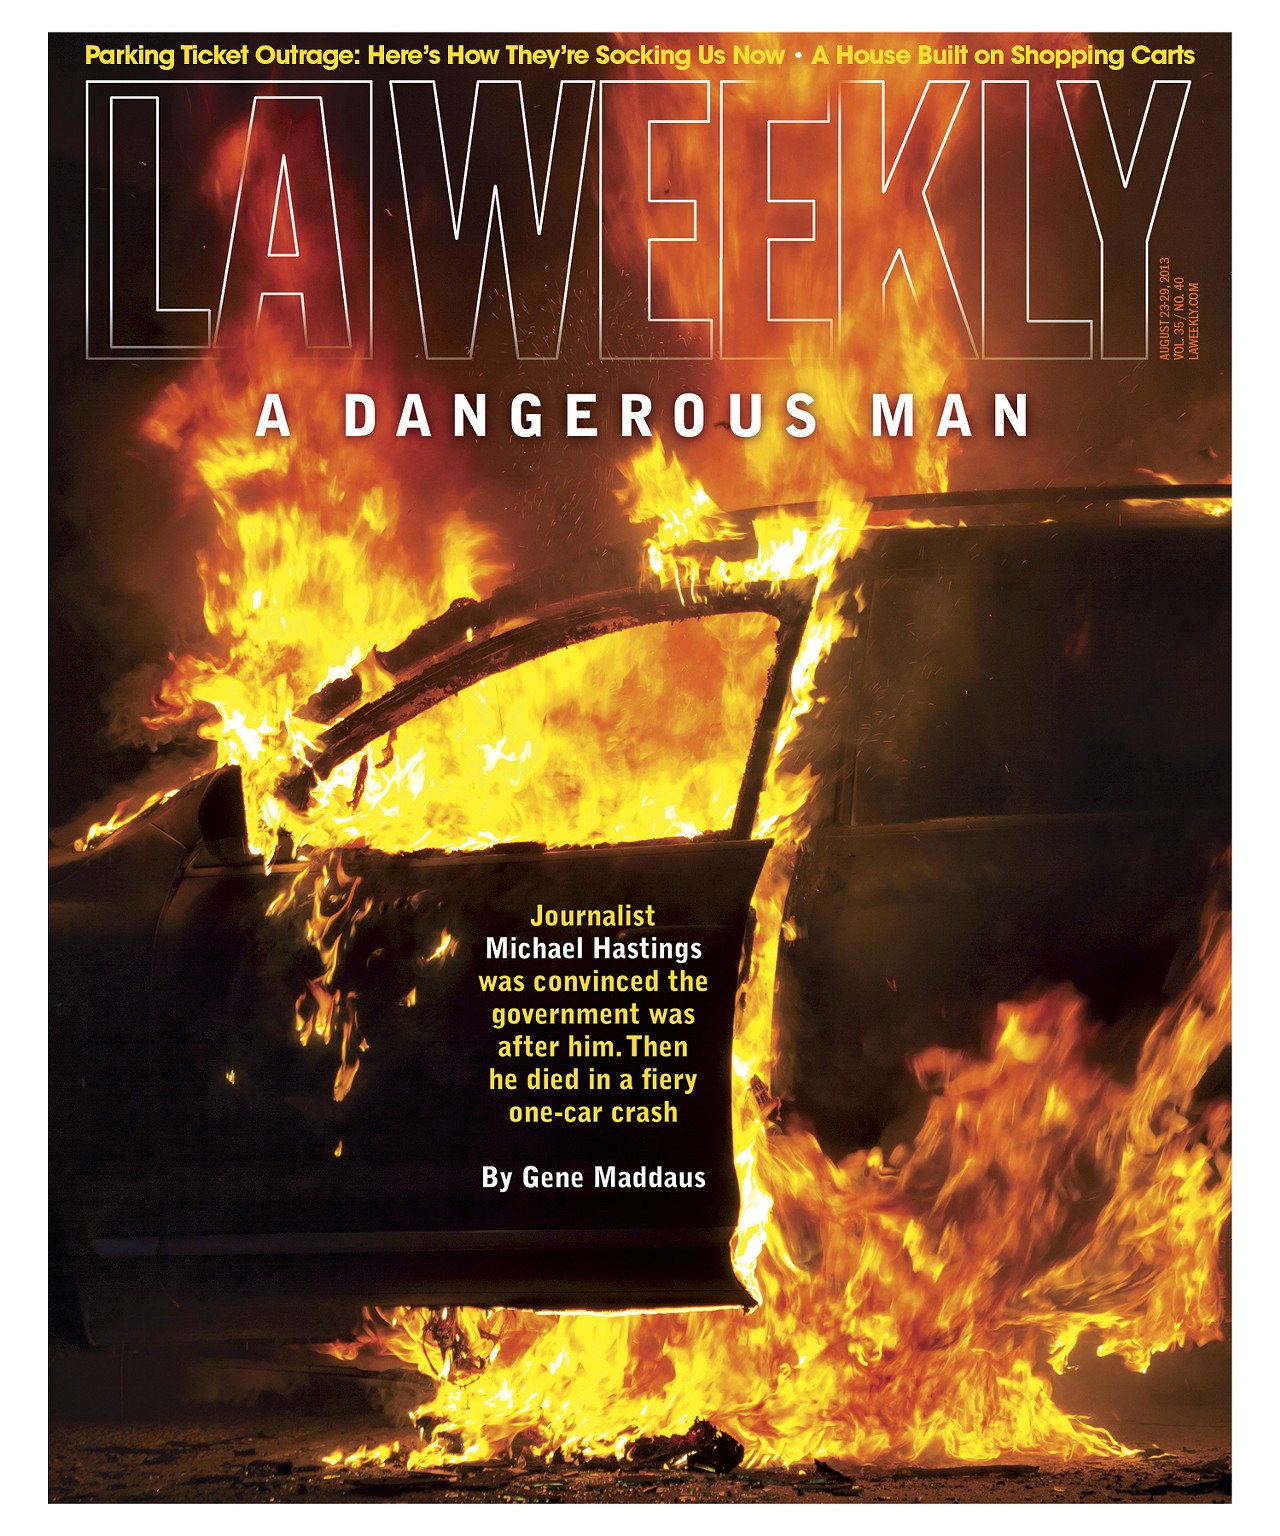 "A Dangerous Man," by Gene Maddaus in L.A. Weekly.